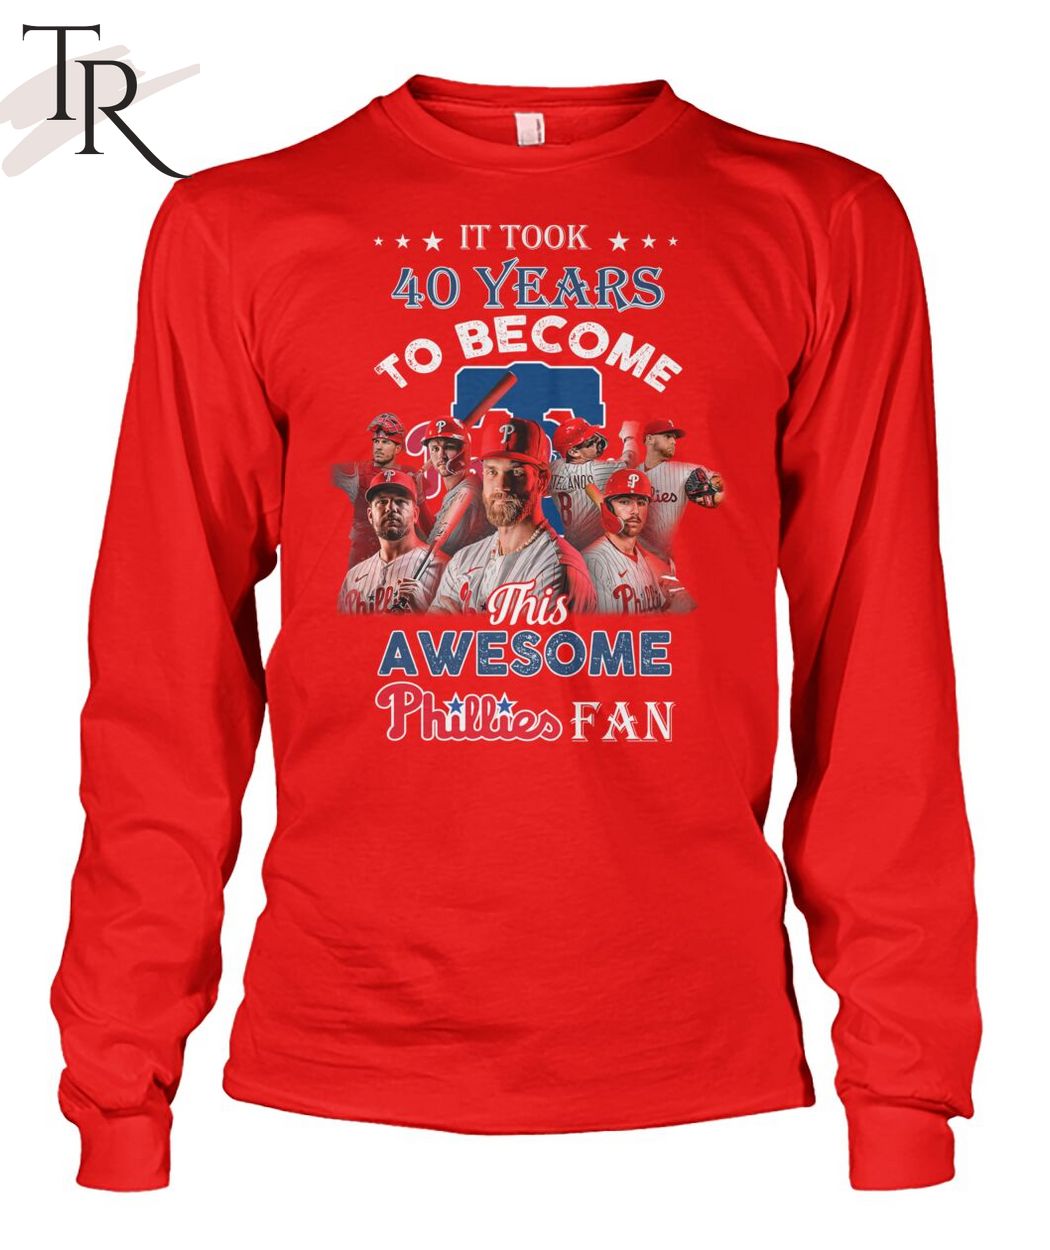 It Took 40 Years To Become This Awesome Phillies Fan T-Shirt